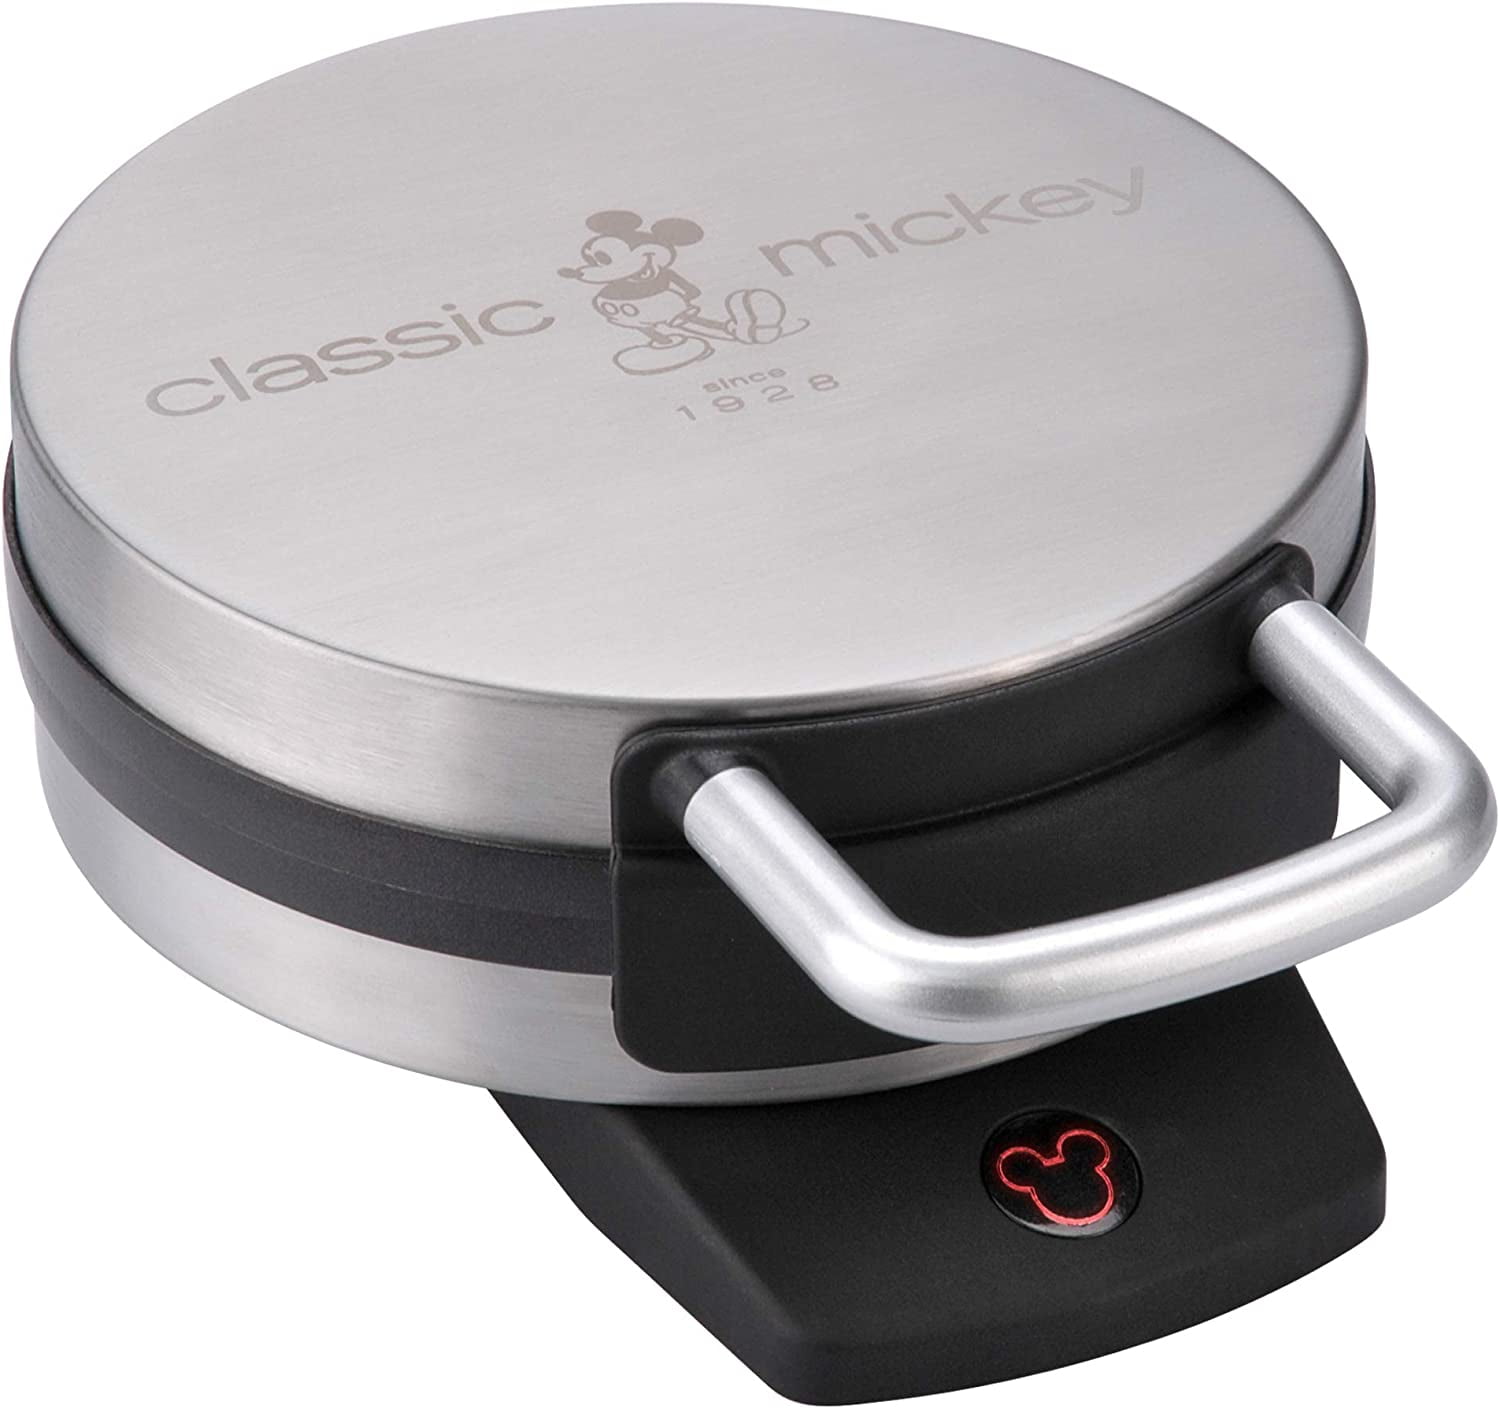 Disney Classic Mickey Waffle Maker, Brushed Stainless Steel